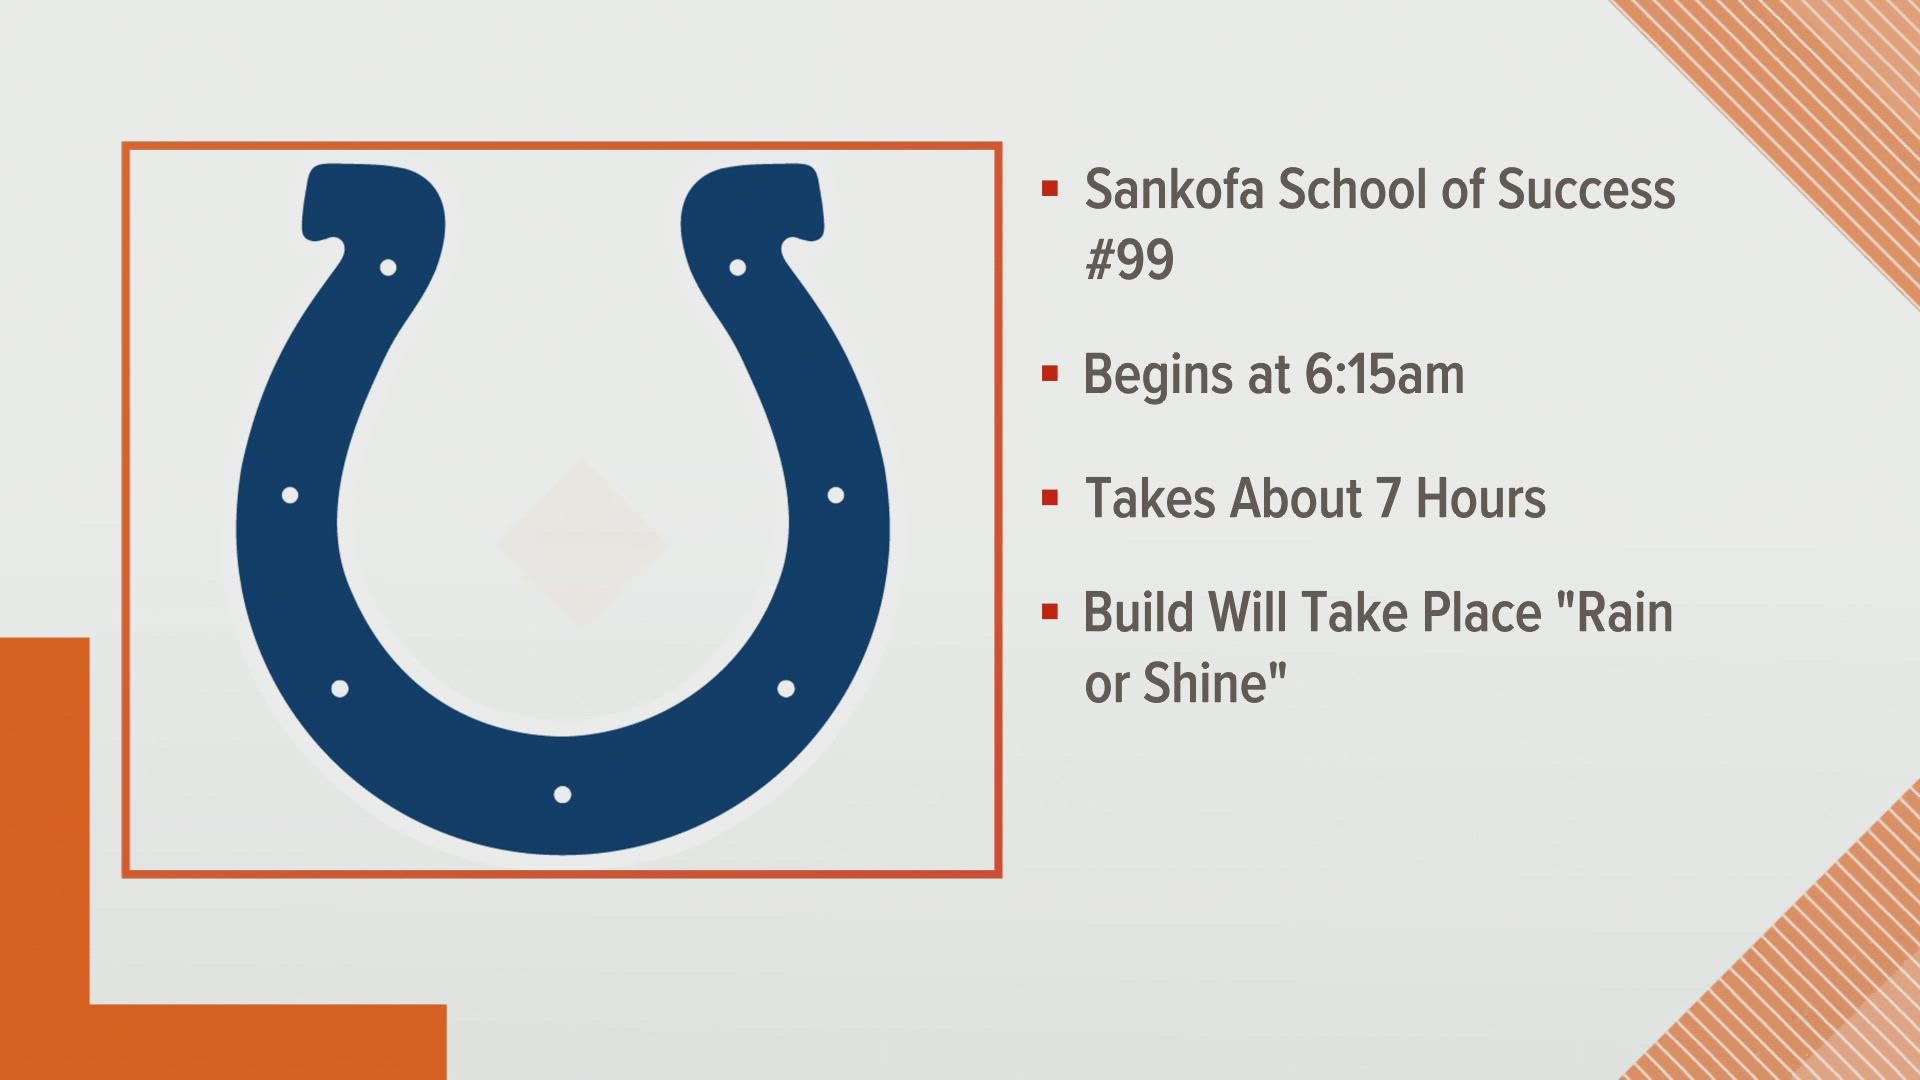 More than 150 volunteers from the Indianapolis Colts and various local partners will build a new playground and outdoor classroom at Sankofa School of Success #99.